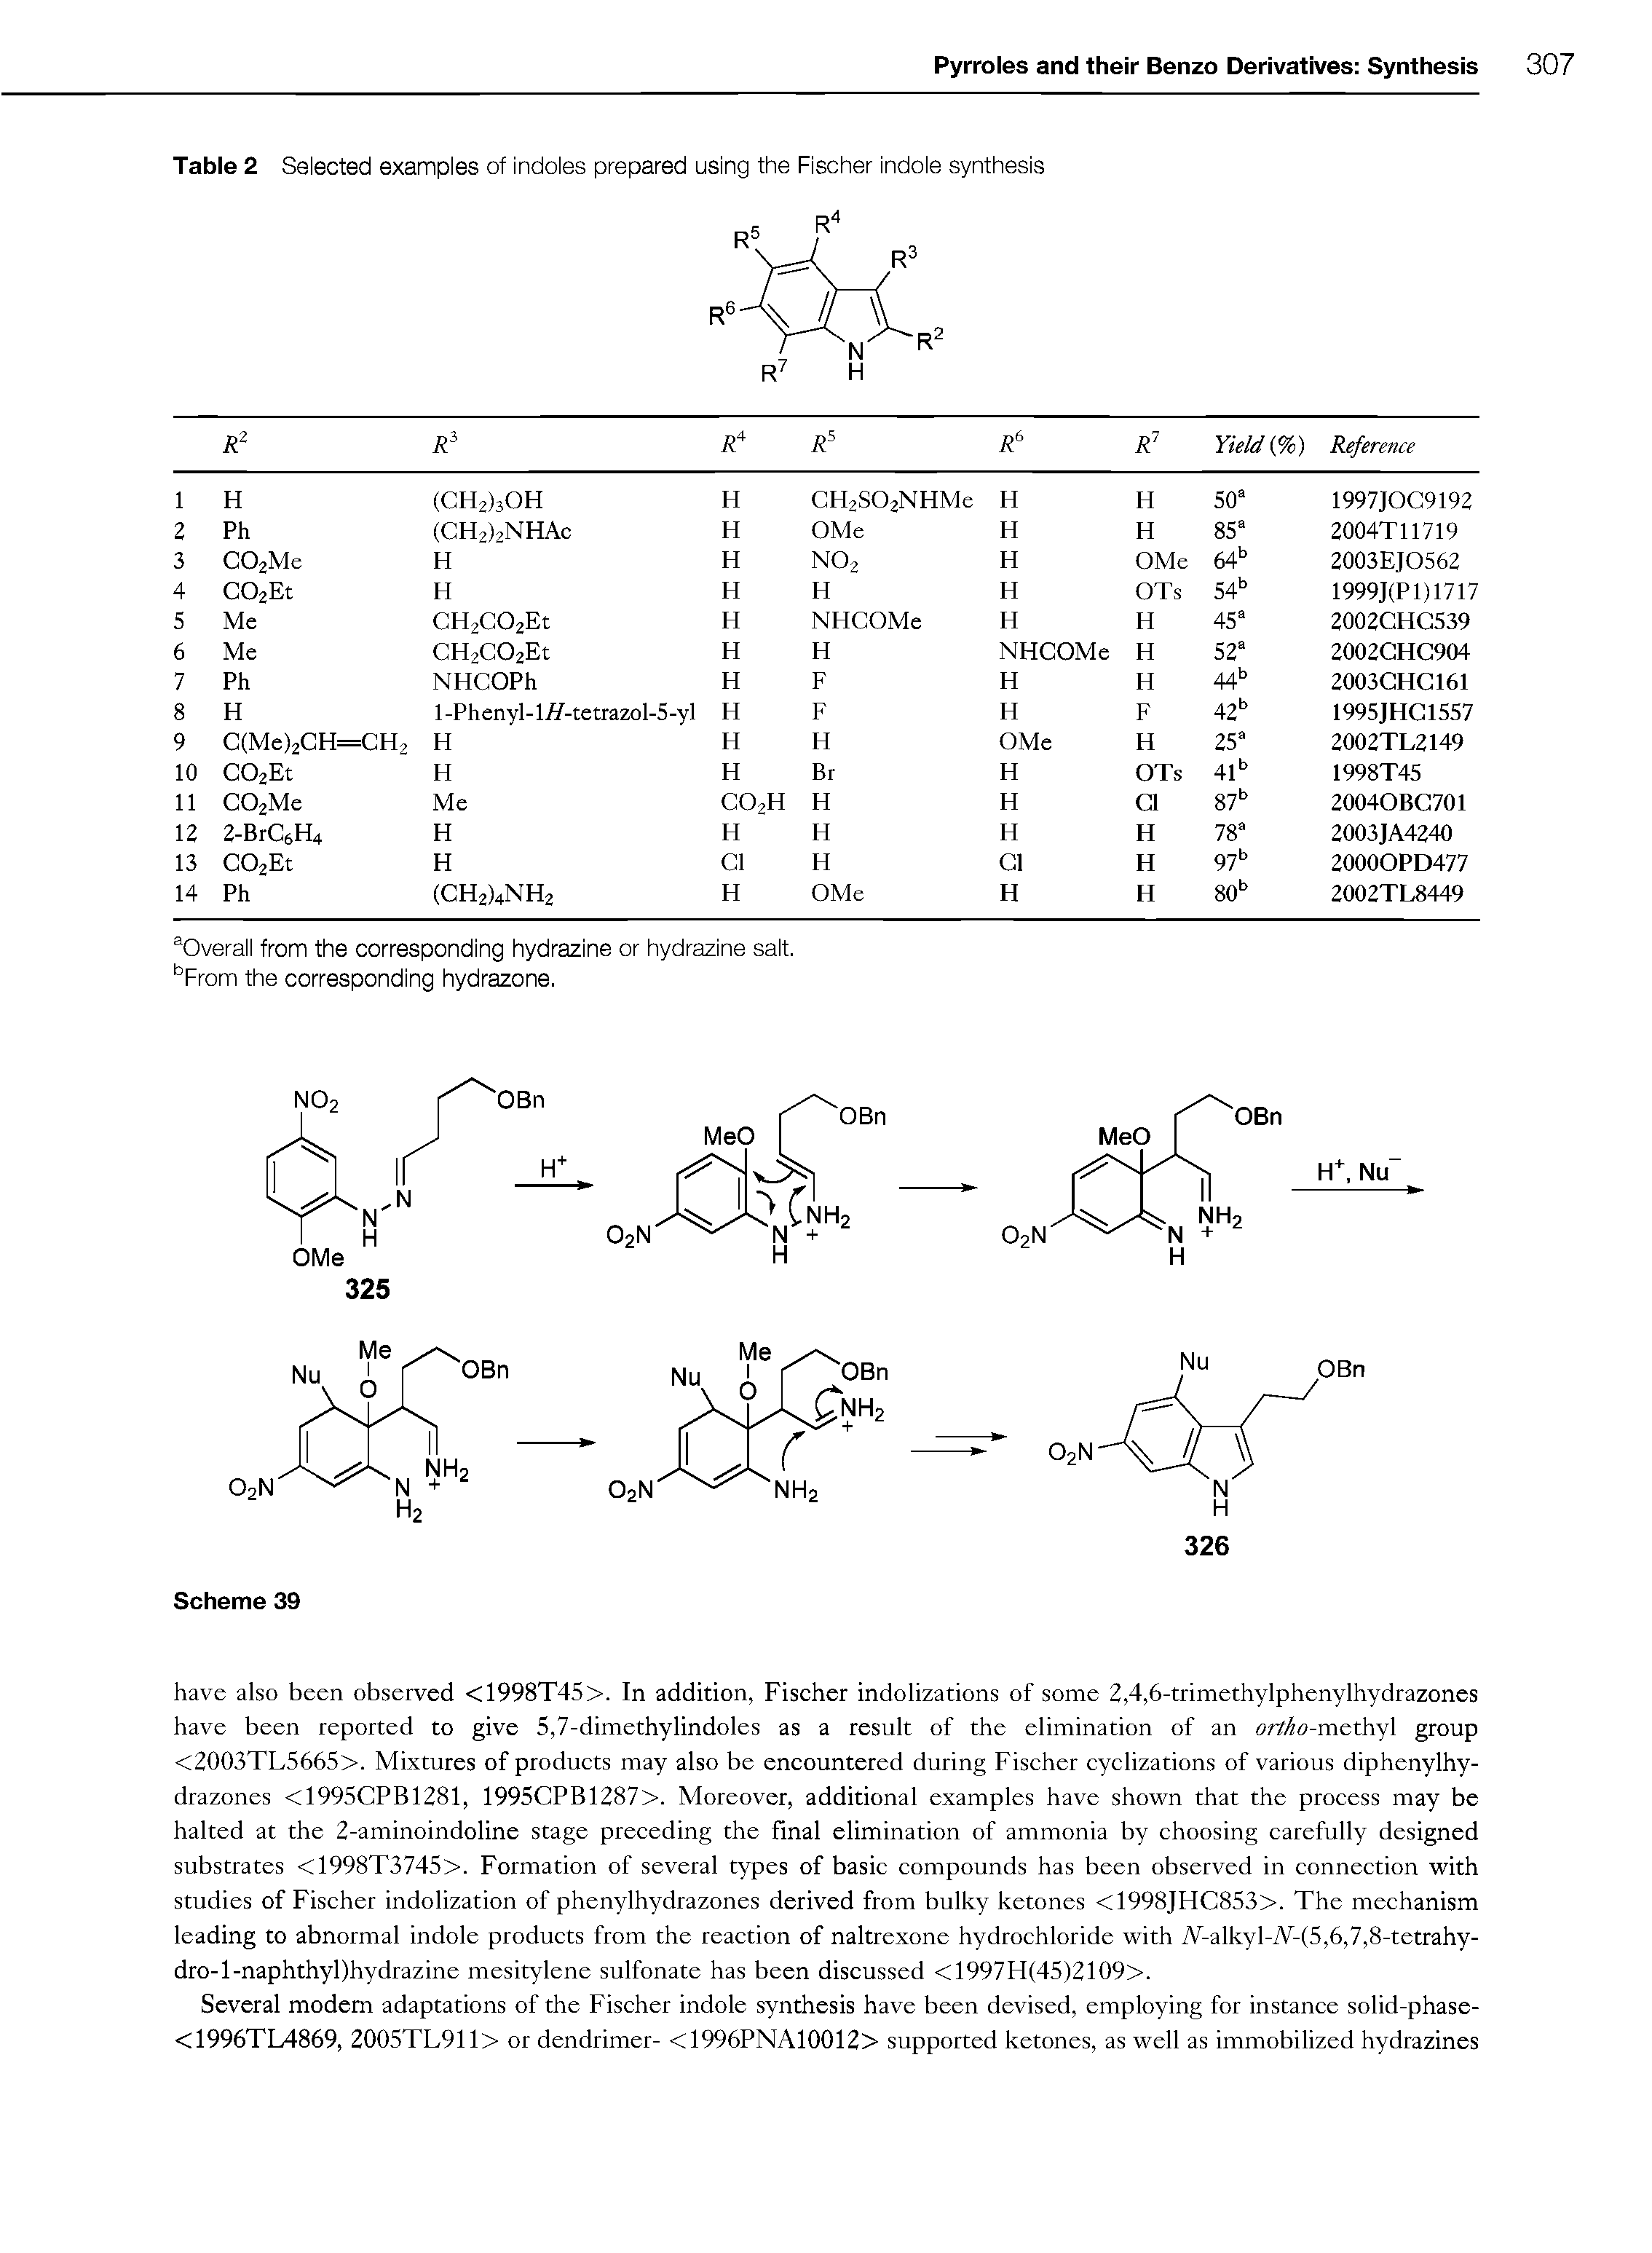 Table 2 Selected examples of Indoles prepared using the Flsoher Indole synthesis...